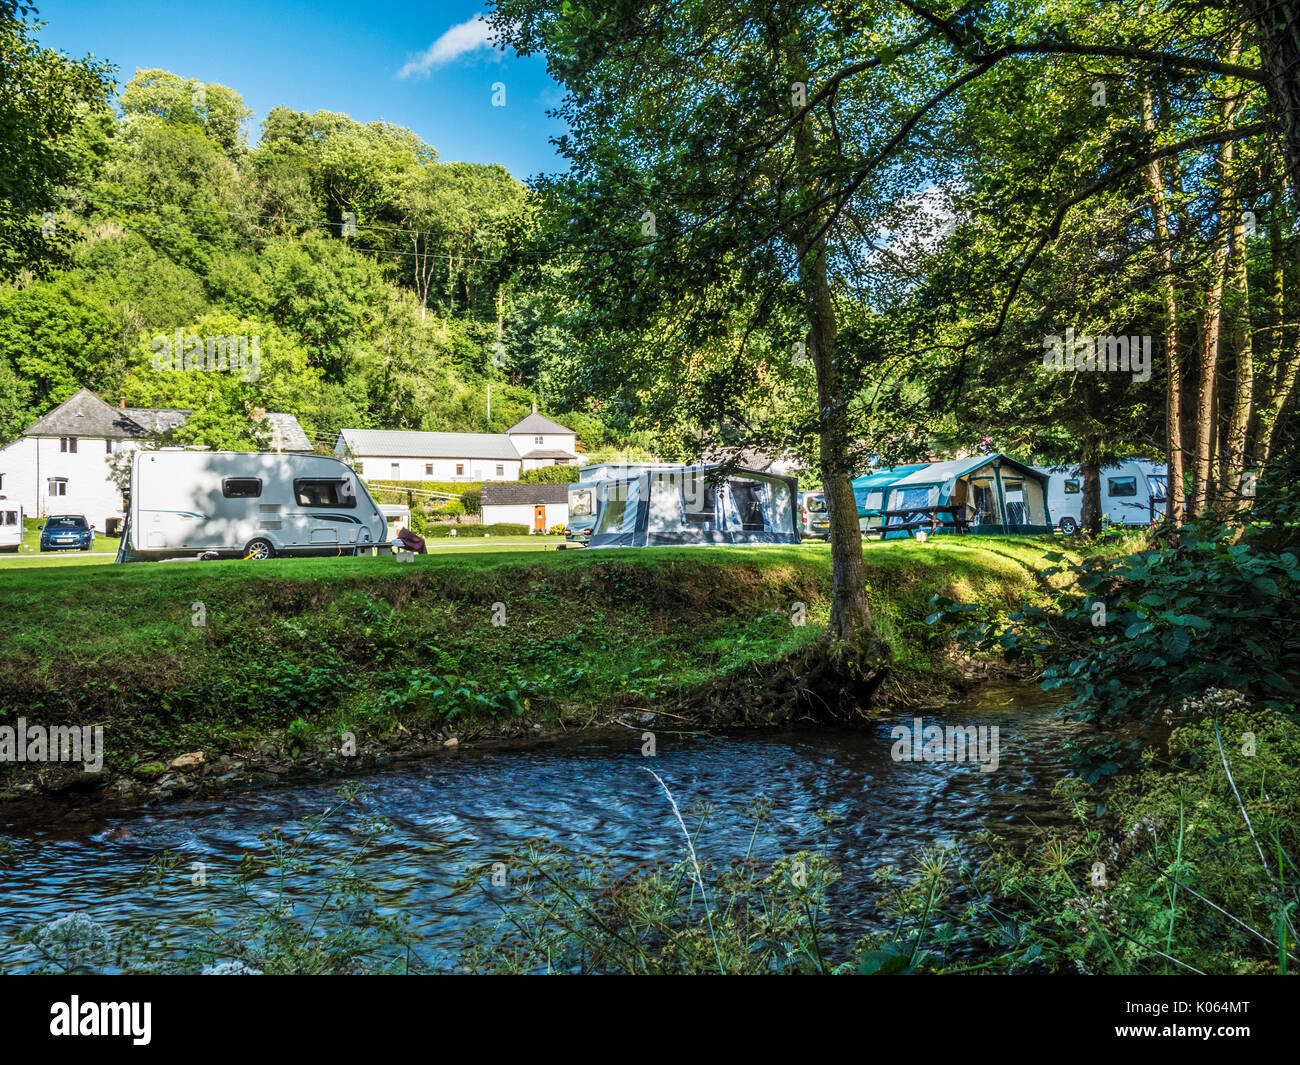 A small caravan site along the banks of the River Exe in Exmoor, Somerset. Stock Photo